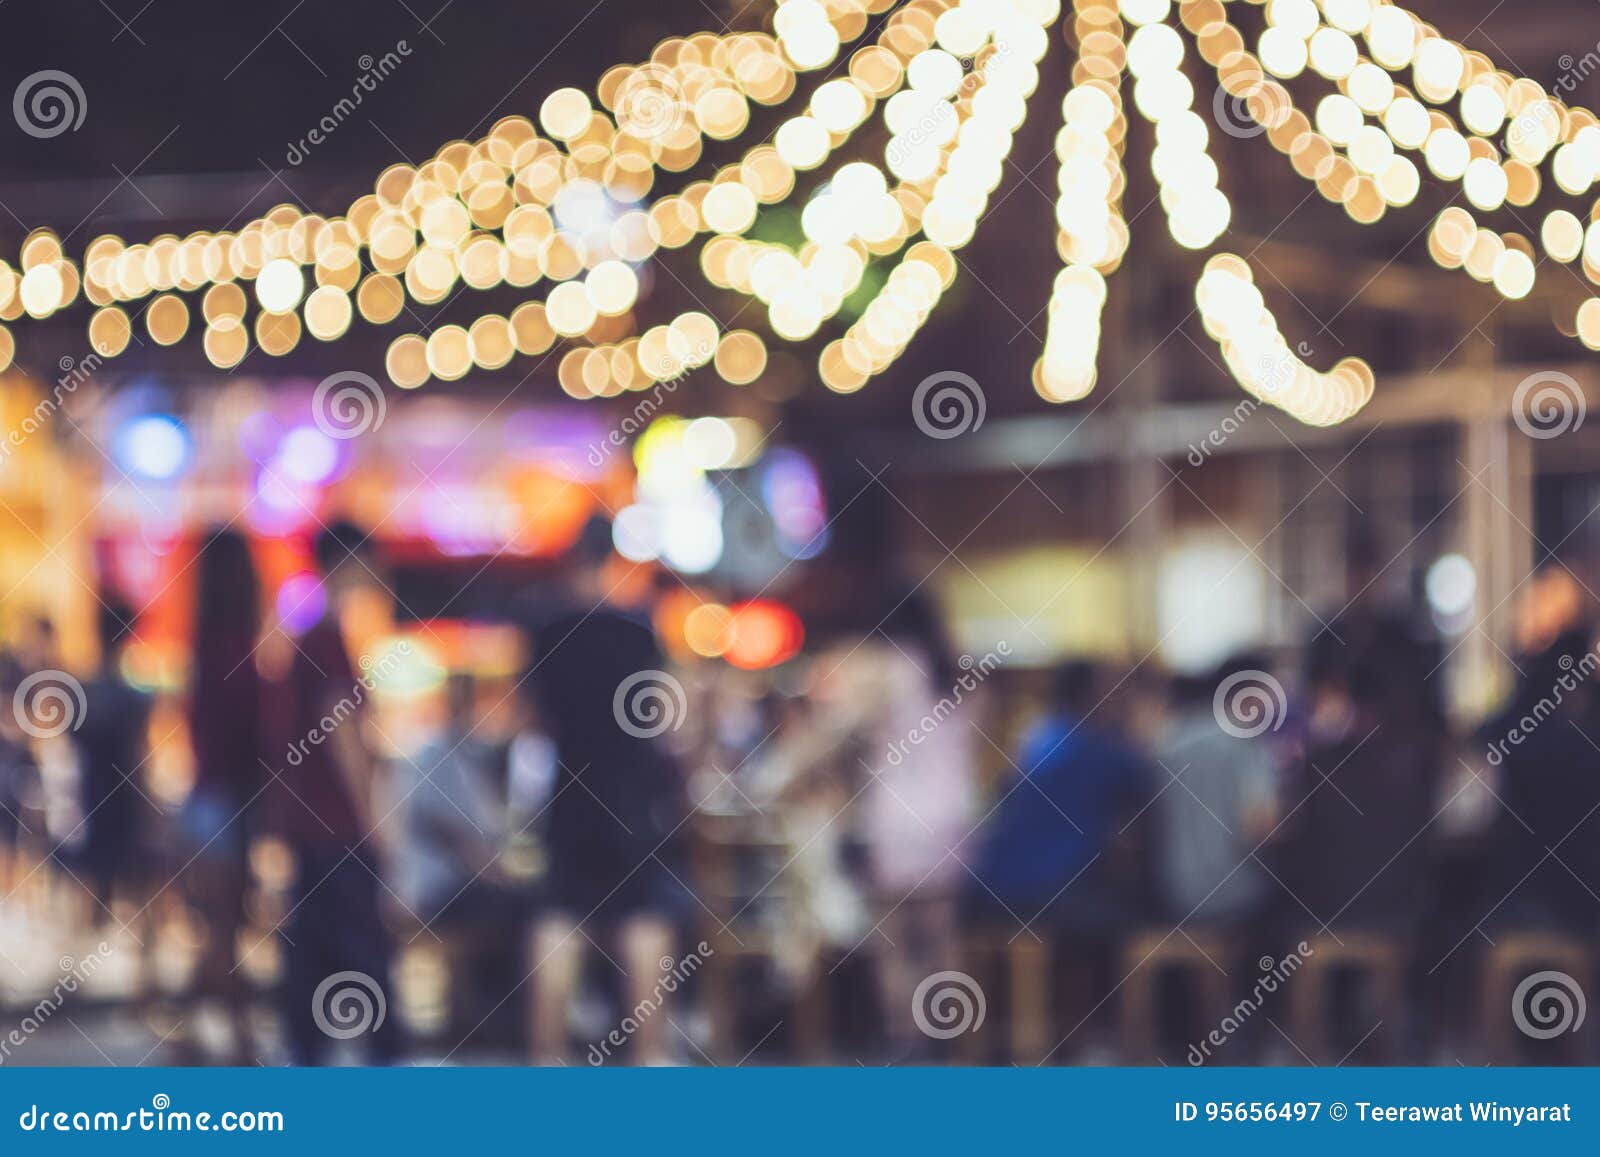 festival event party outdoor blurred people background lights